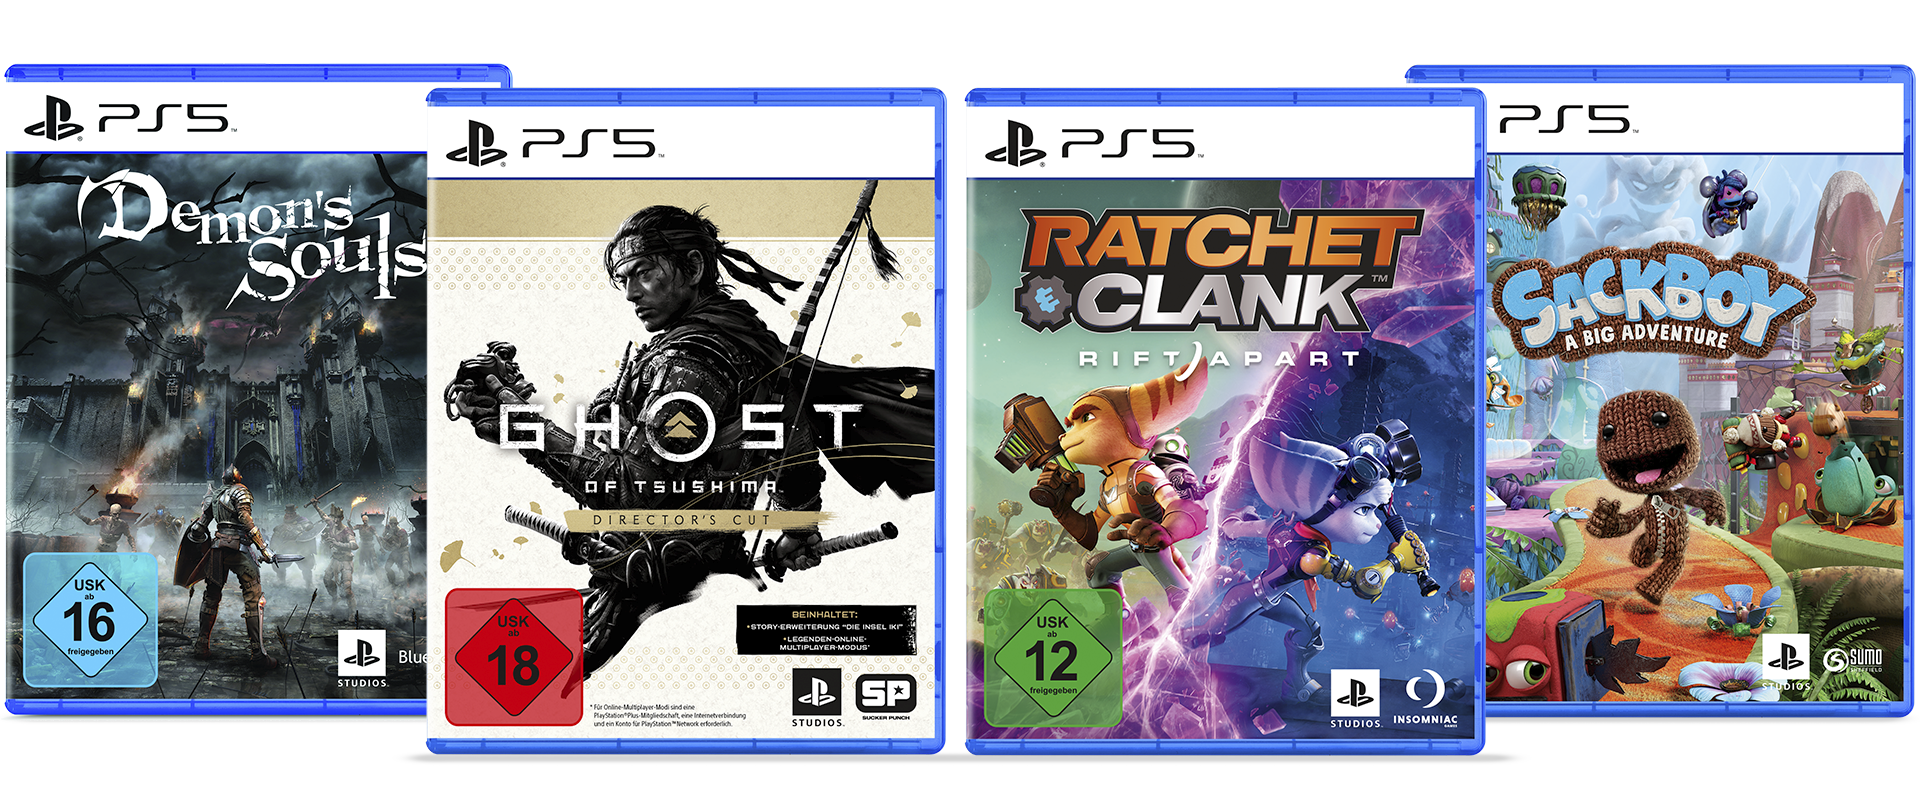 Image lock-up of Ghost of Tsushima Director's Cut, Demon's Souls, Sackboy: A Big Adventure and Ratchet & Clank: Rift Apart